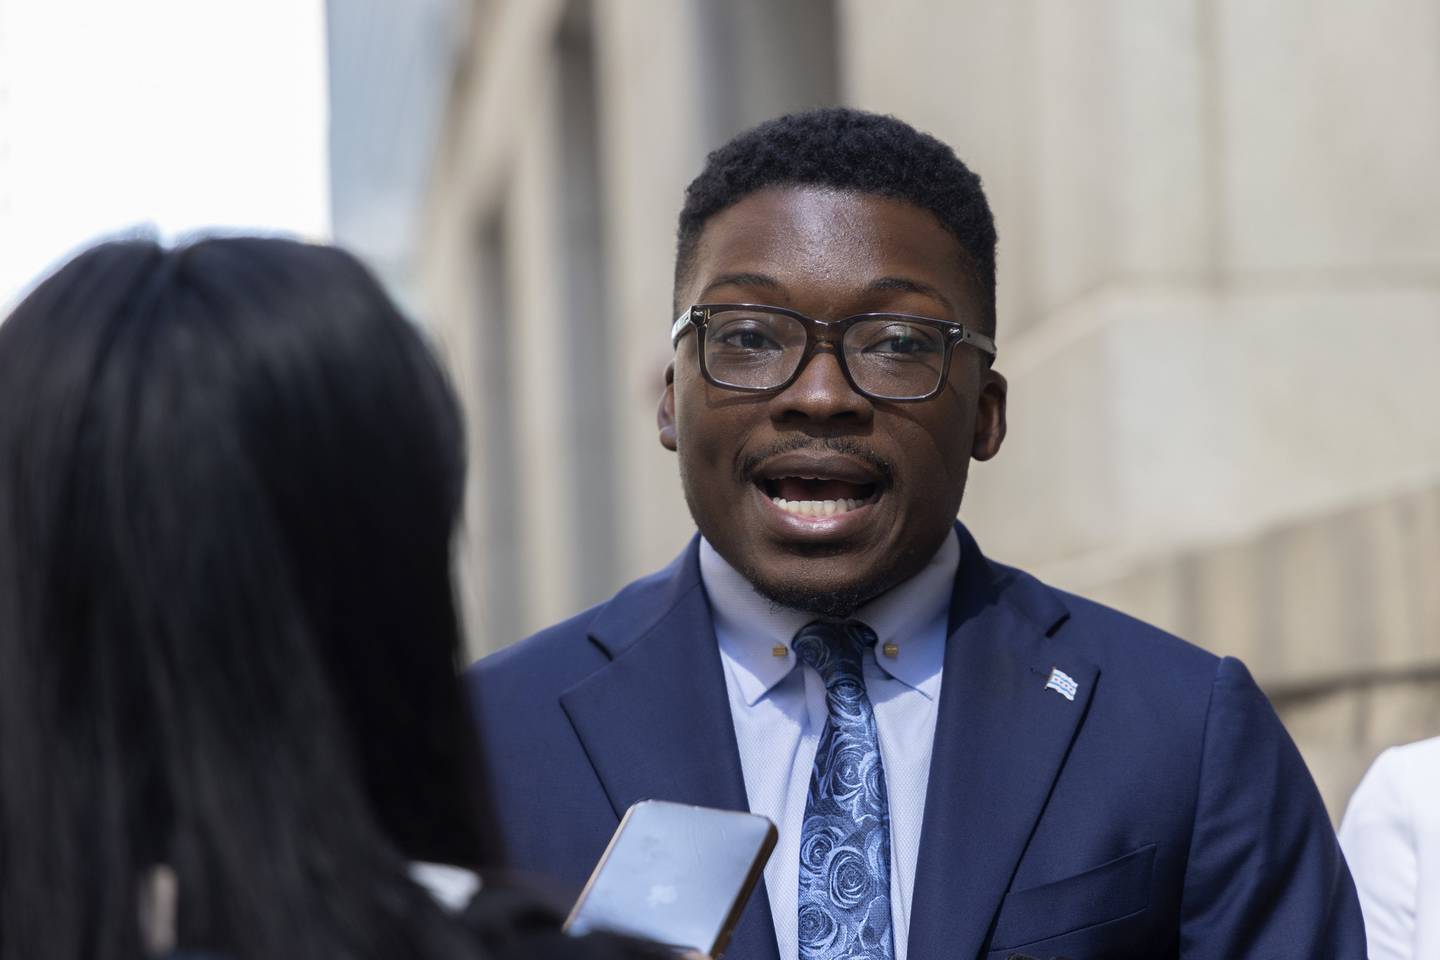 Mayoral candidate Ja'Mal Green, outside City Hall on Sept. 20, is among several challengers to Lori Lightfoot.